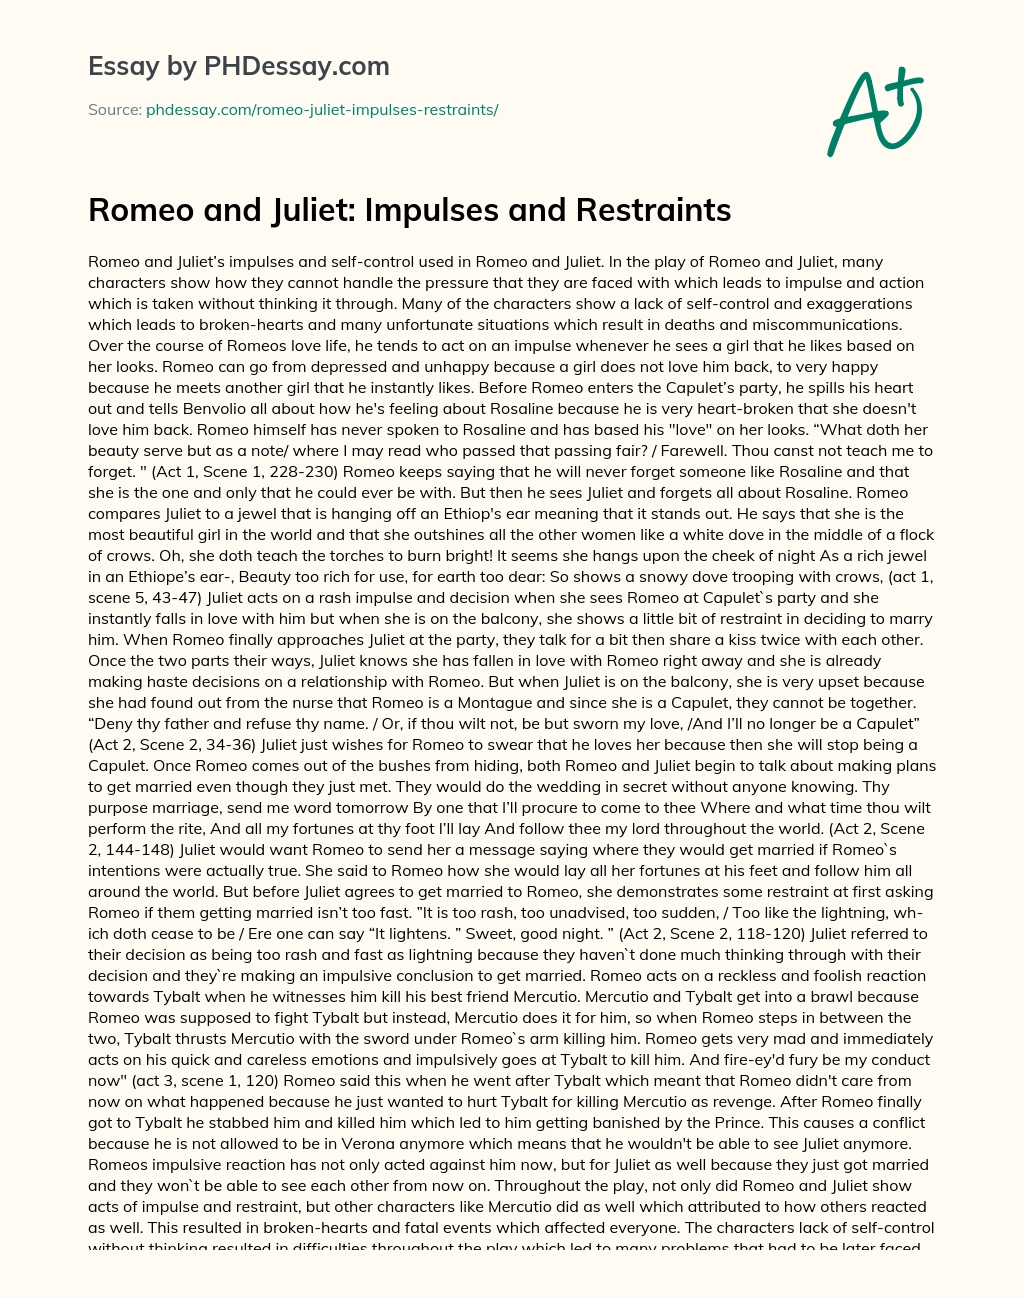 Romeo and Juliet: Impulses and Restraints essay